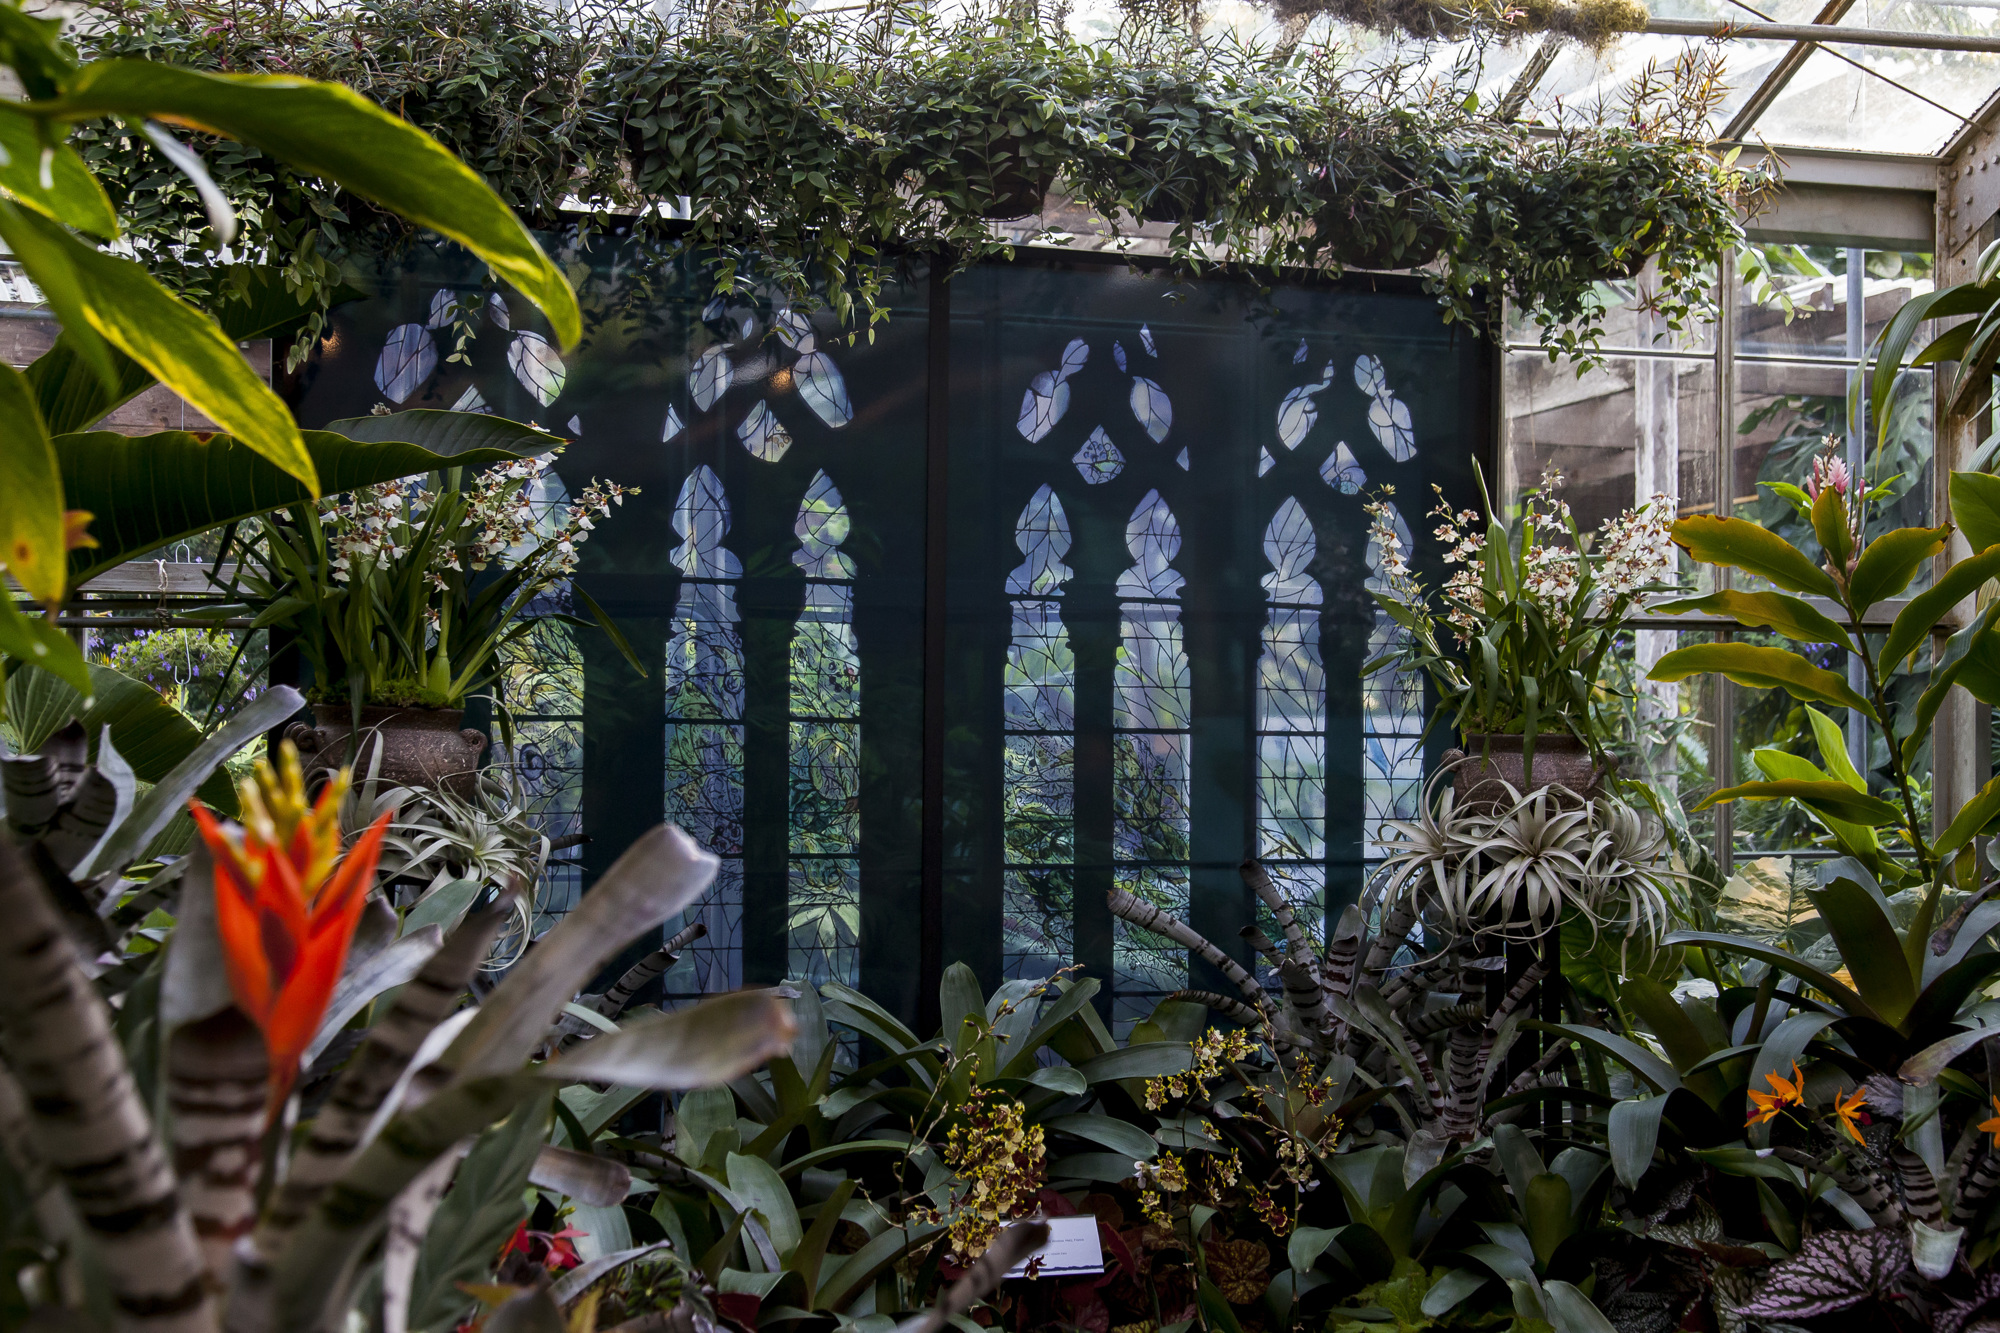 The exhibition starts in a glass conservatory, featuring replicas of Chagall’s stained glass and a cathedral of living plants. Courtesy of Artists Rights Society.